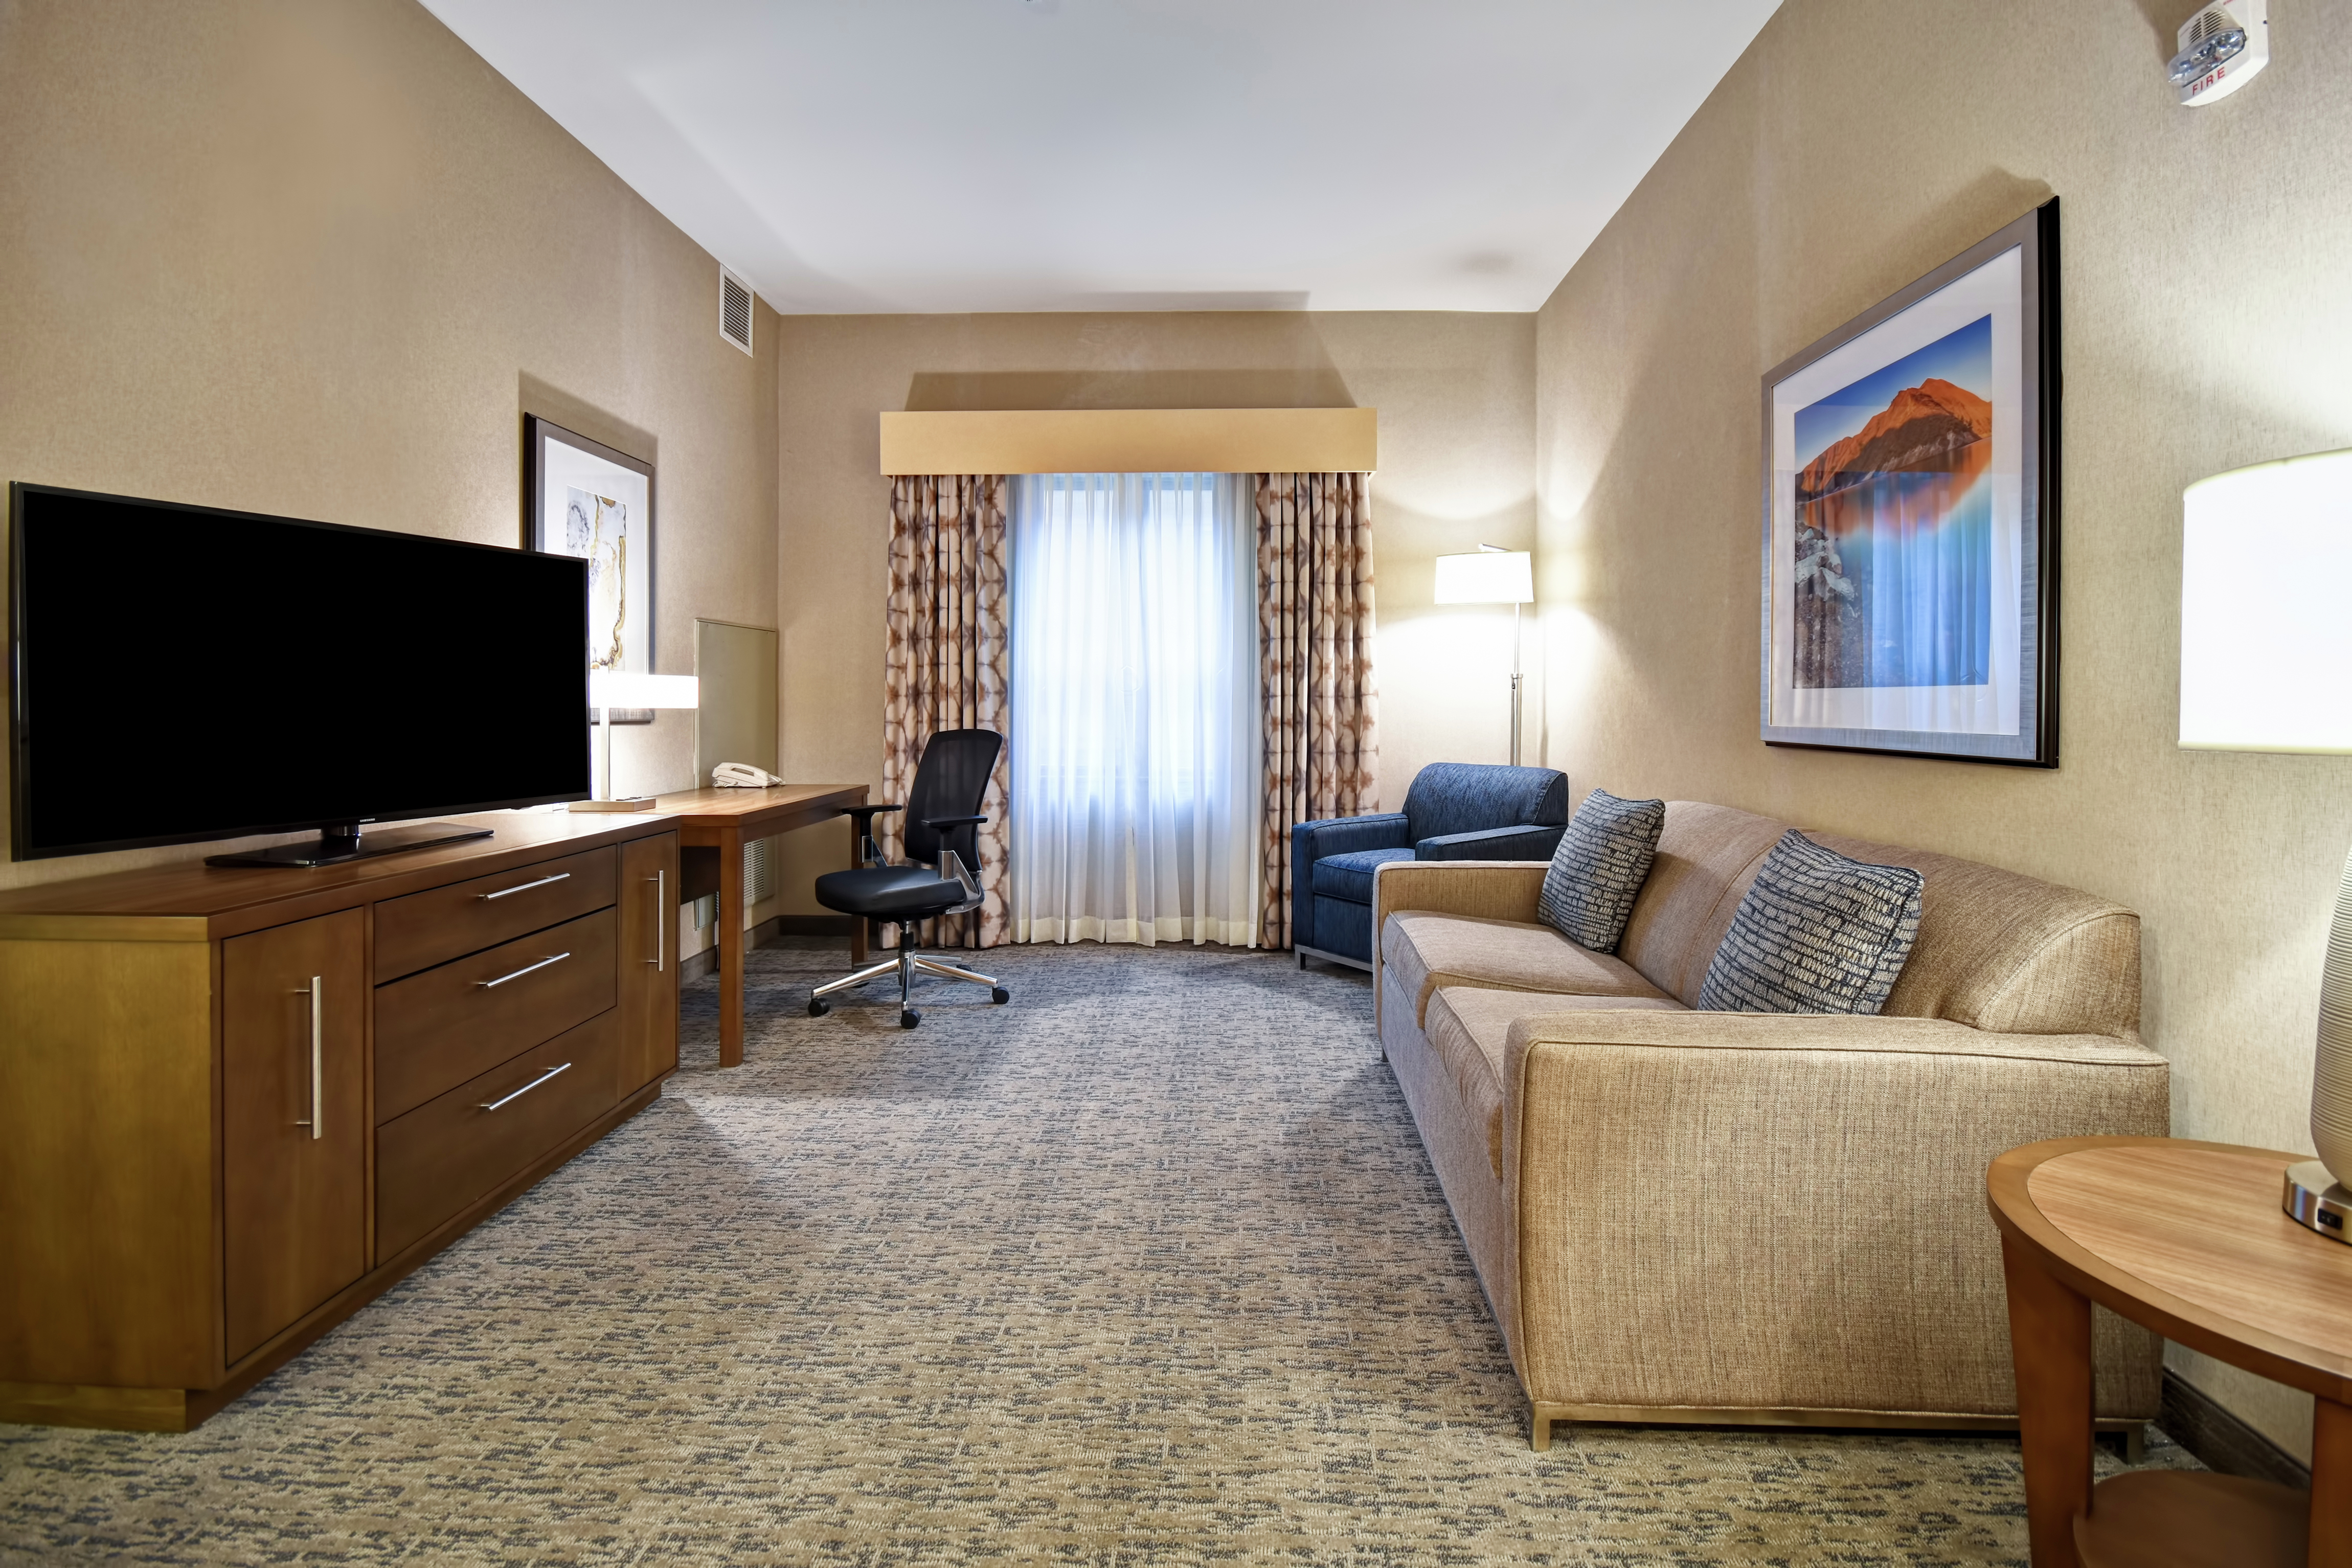 Suite Living Area with Lounge Furniture, Work Desk, and TV